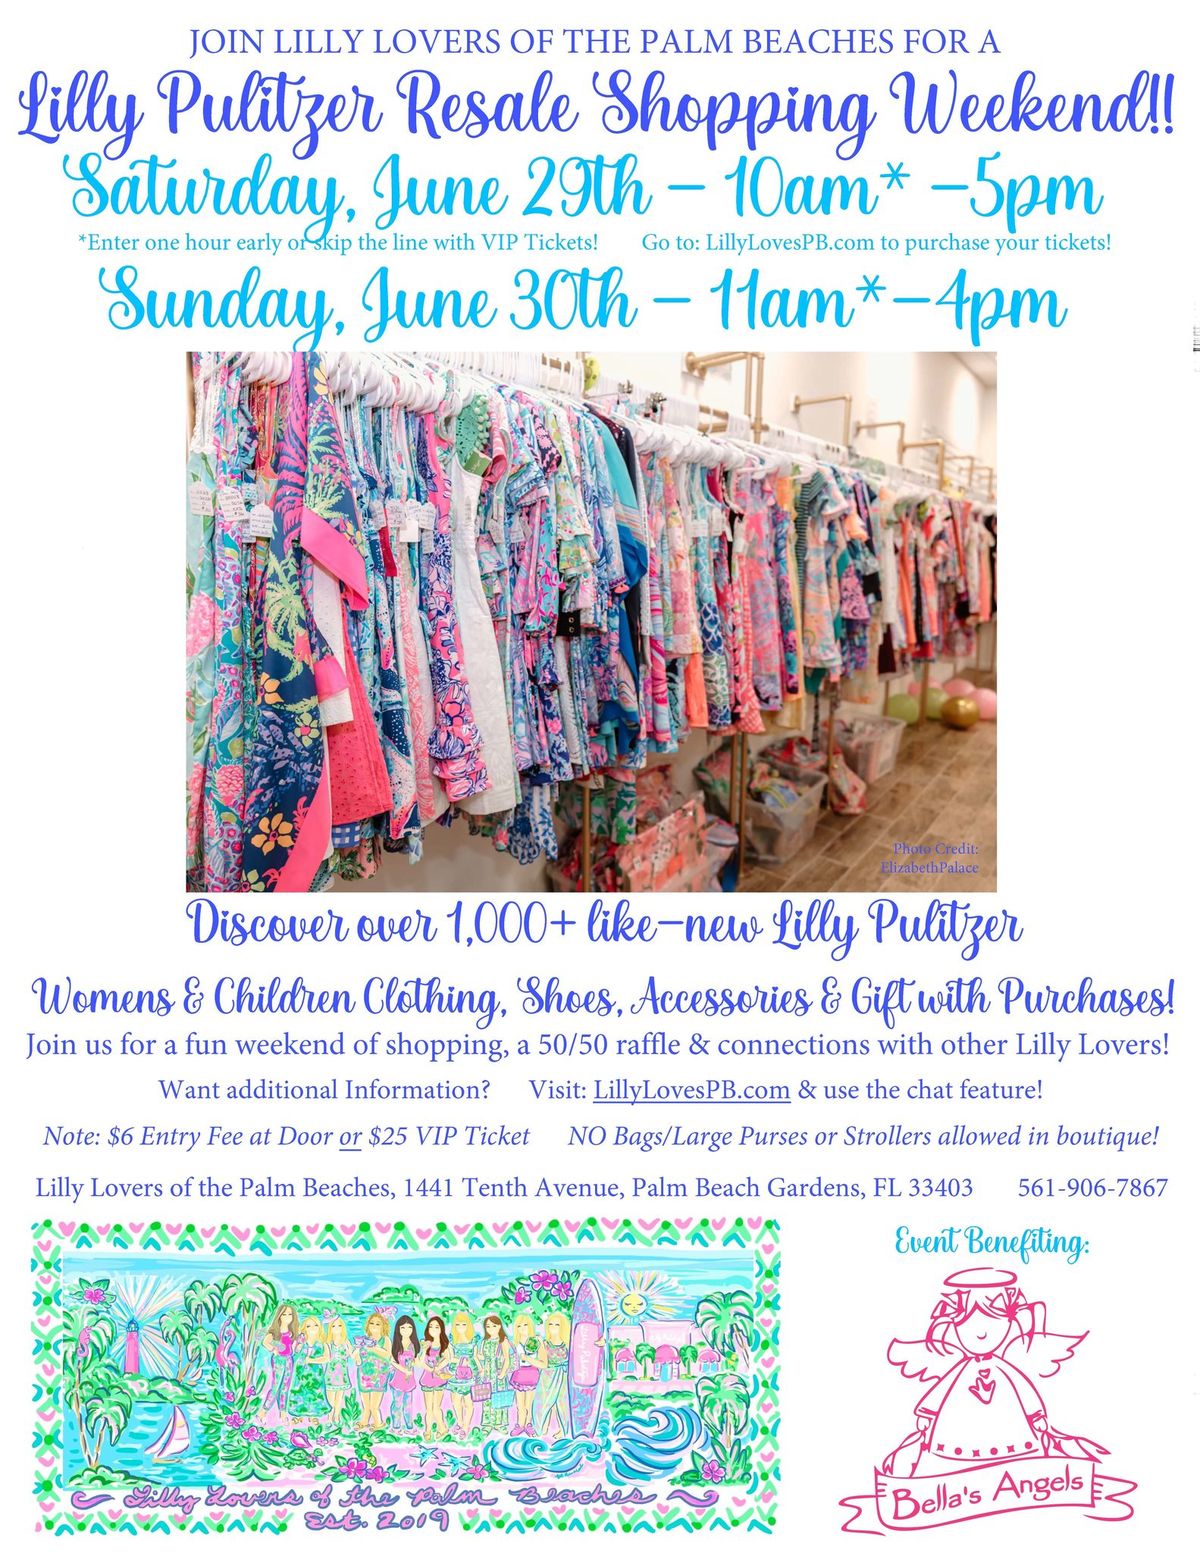 Lilly Pulitzer Resale Shopping Weekend by Lilly Lovers of the Palm Beaches! 